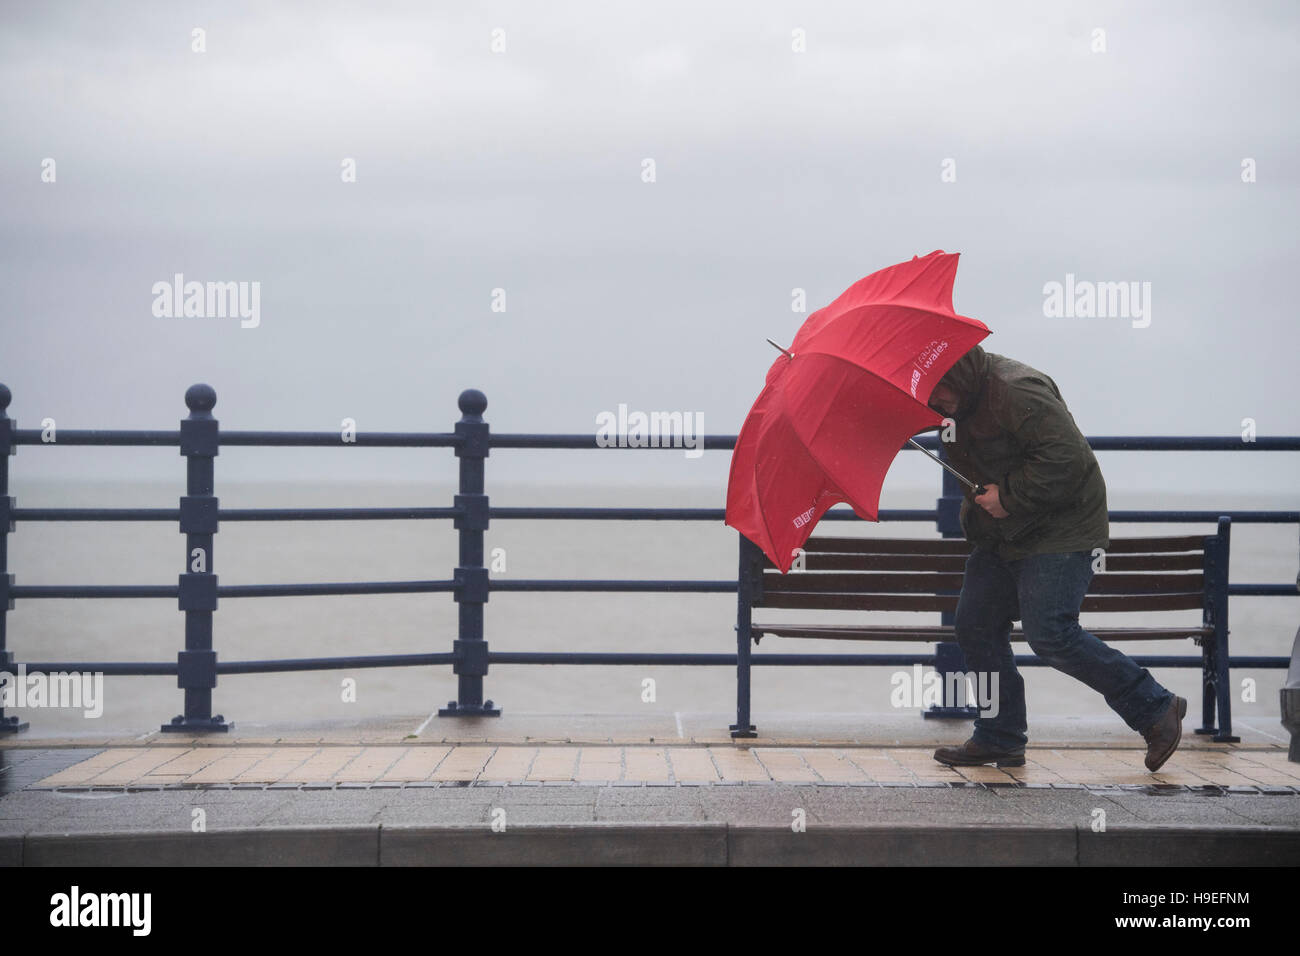 A man battles strong winds with a red umbrella during storm Angus in Porthcawl, South Wales, UK. Stock Photo